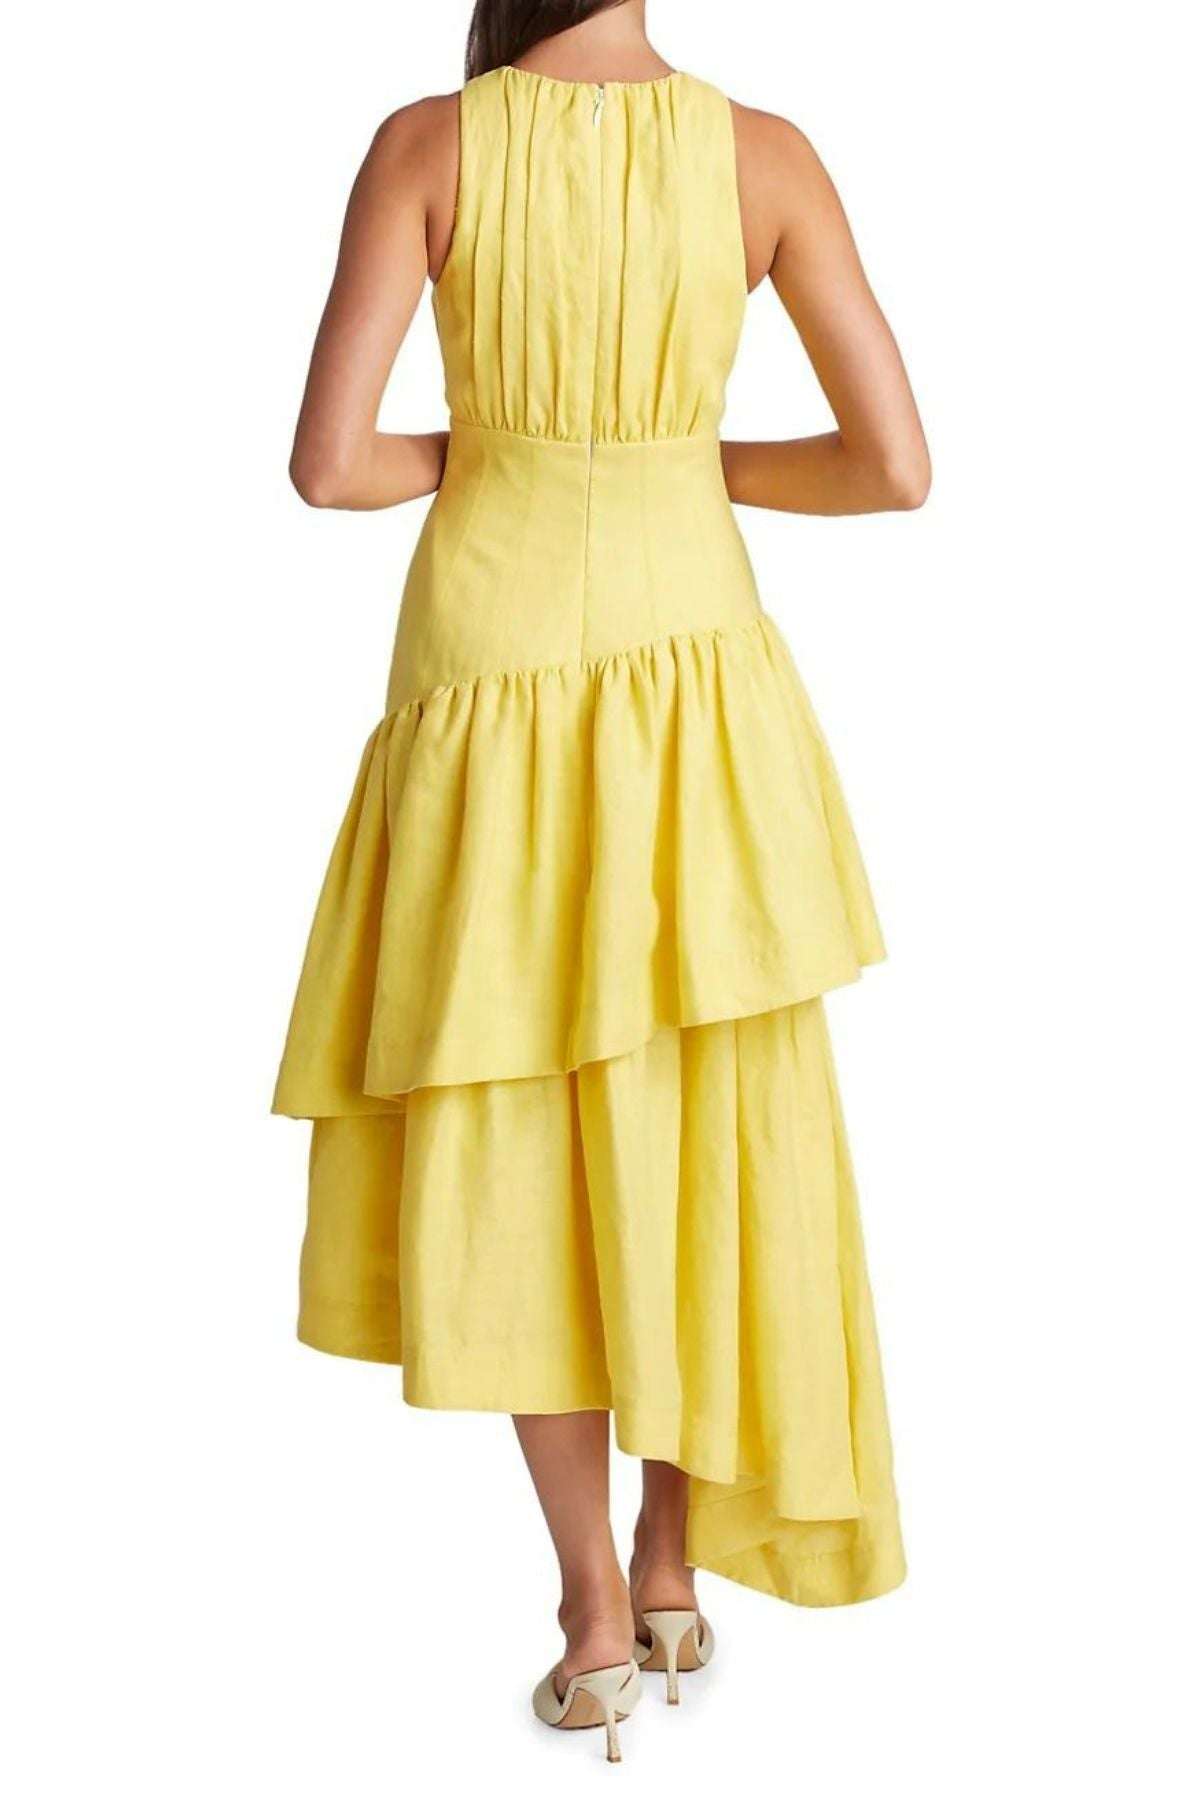 Aje AJE Caliente Tiered Cut Out Dress (Daisy Yellow) - RRP $575 - aje-caliente-tiered-cut-out-dress-daisy-yellow---rrp-5-dress-for-a-night-30753649.jpg